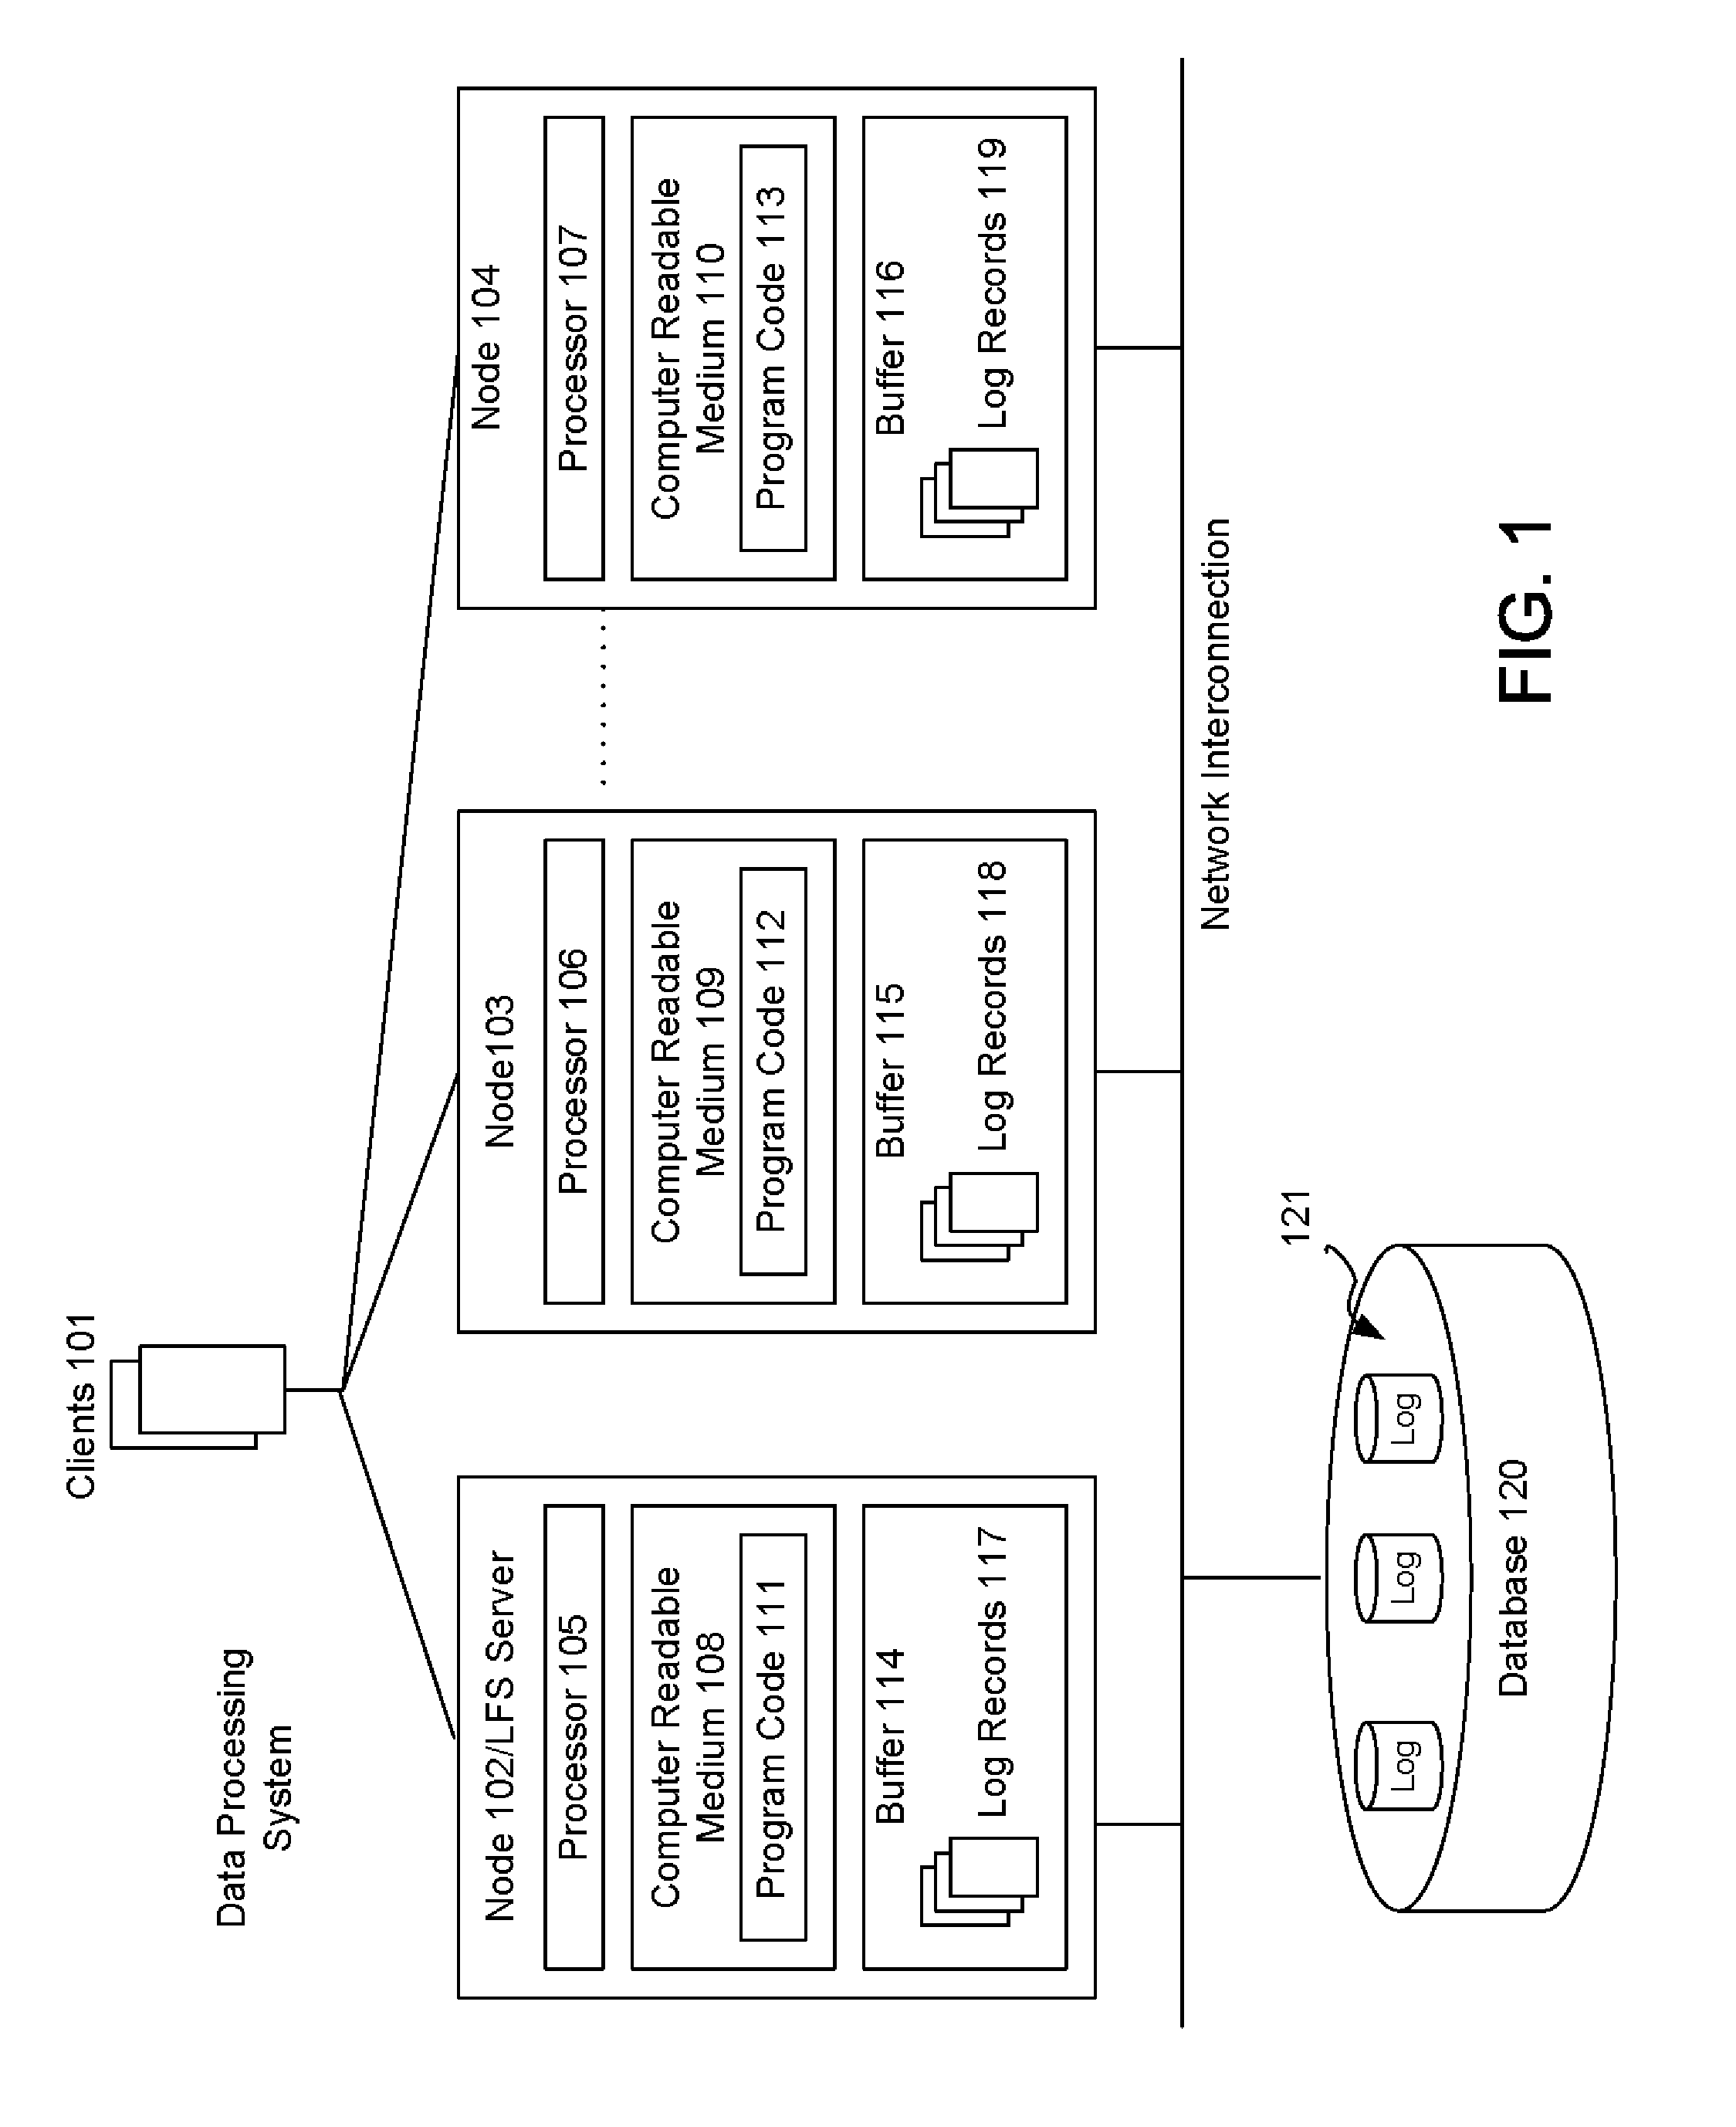 Methods to Minimize Communication in a Cluster Database System